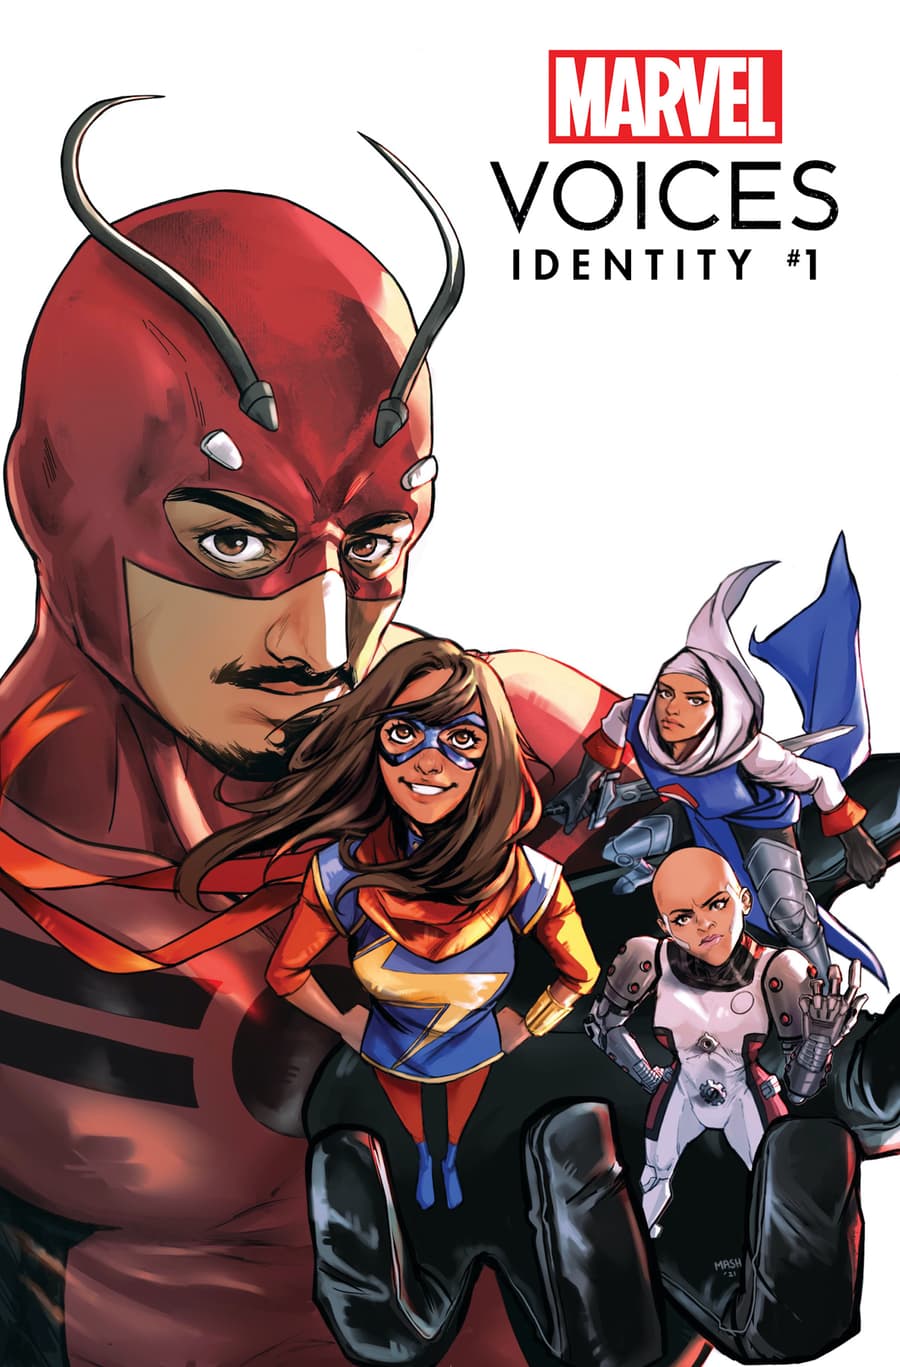 MARVEL’S VOICES: IDENTITY #1 Variant Cover by MASHAL AHMED